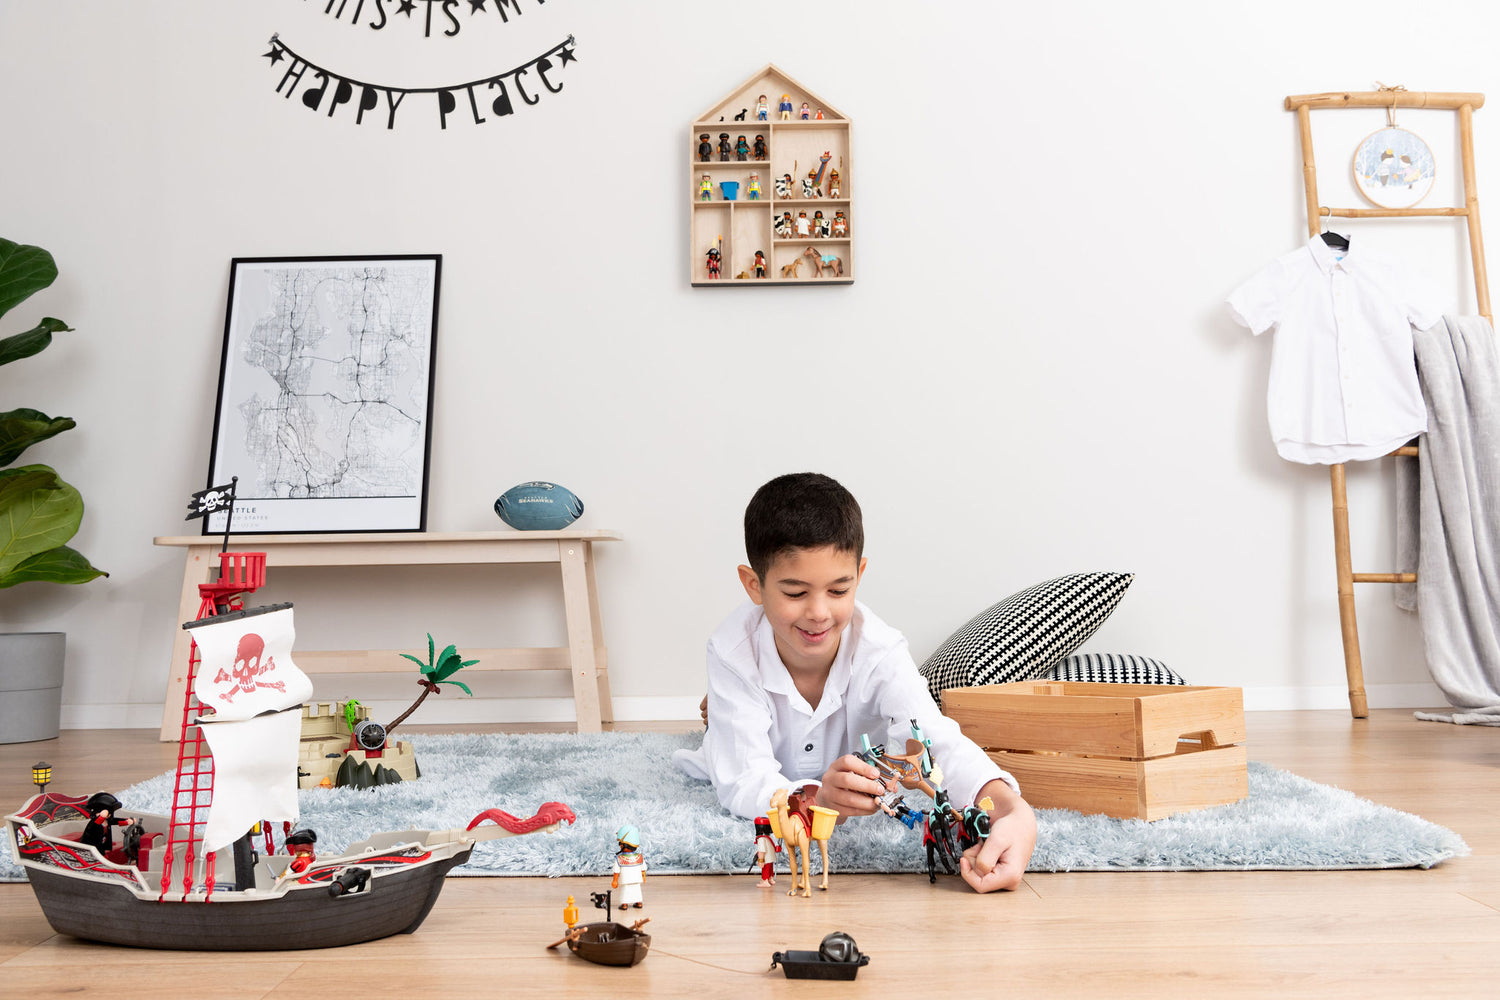 Boy playing with Playmobil near a house shaped wooden shelf with black painted outer walls that is hanged on the wall